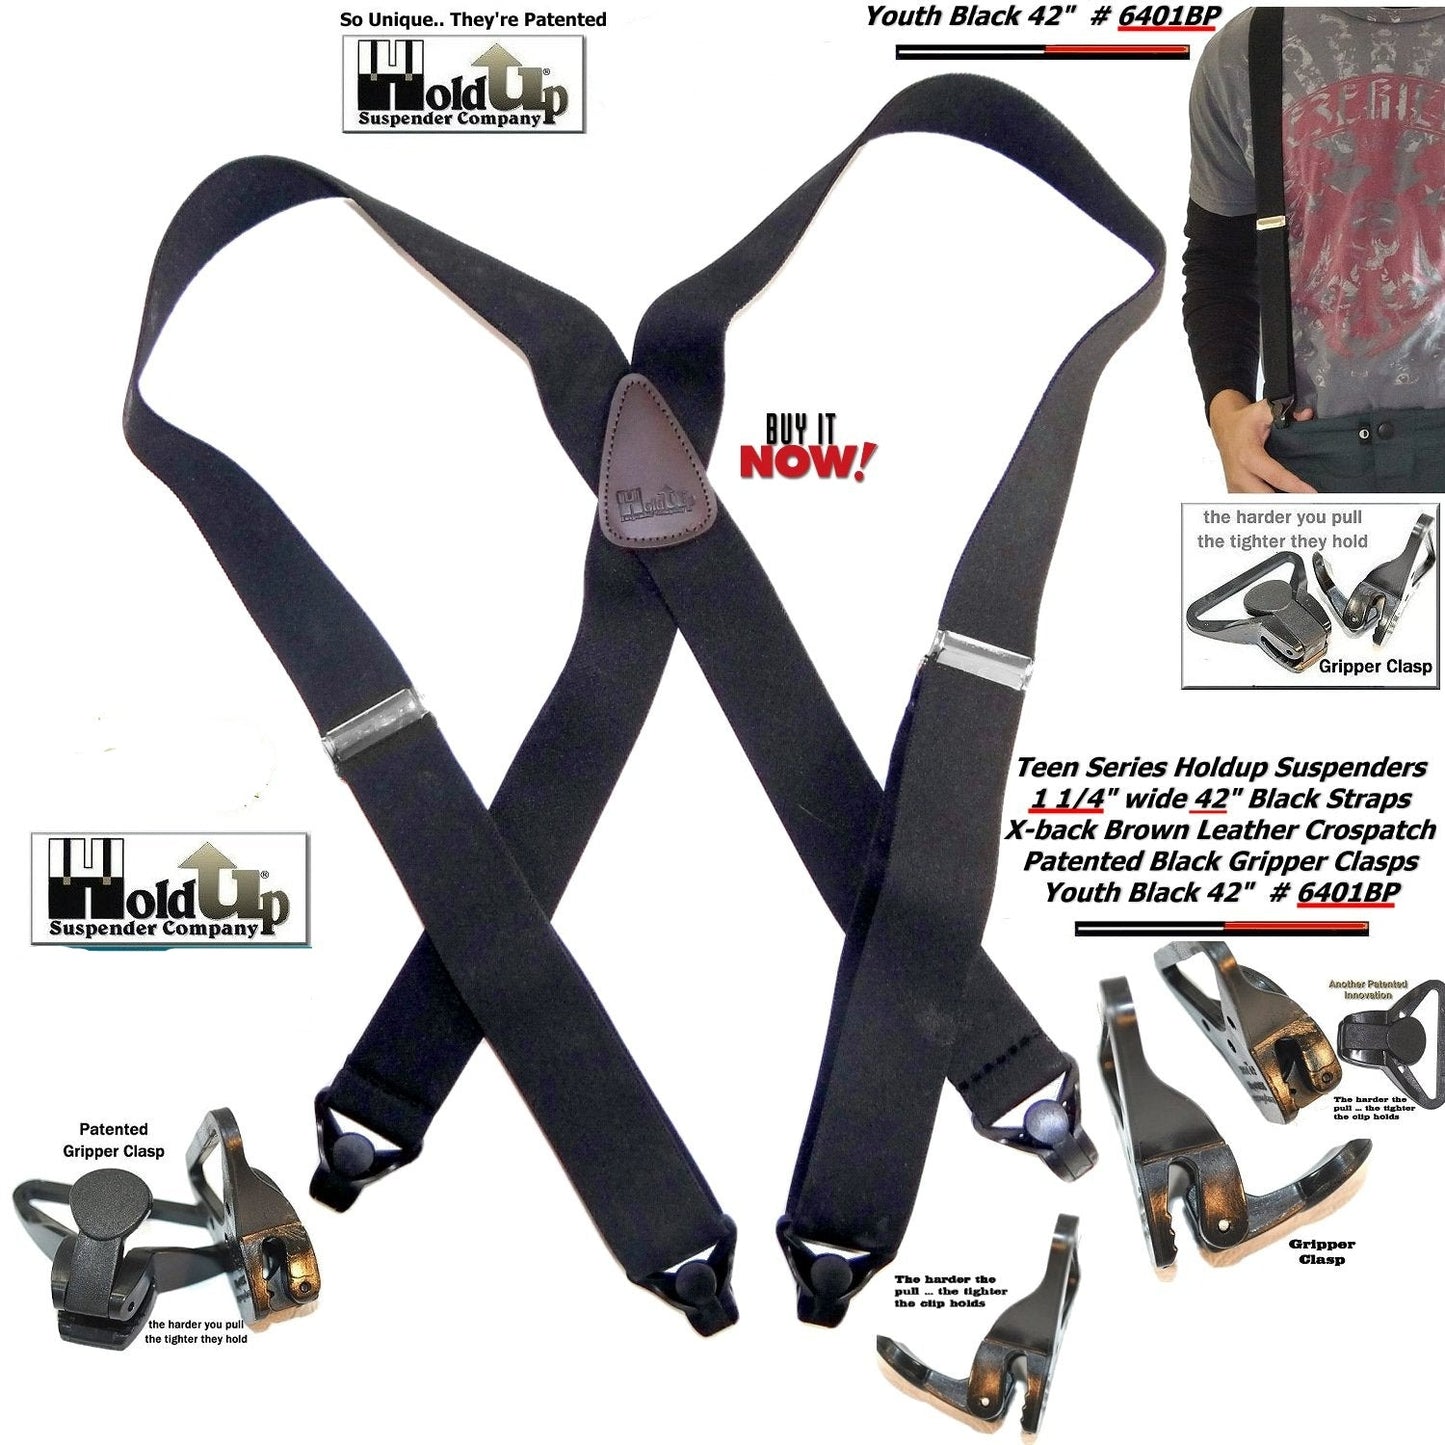 Holdup Black 42" Teen size Black Ski-Ups X-back Suspenders with USA Patented Gripper Clasps